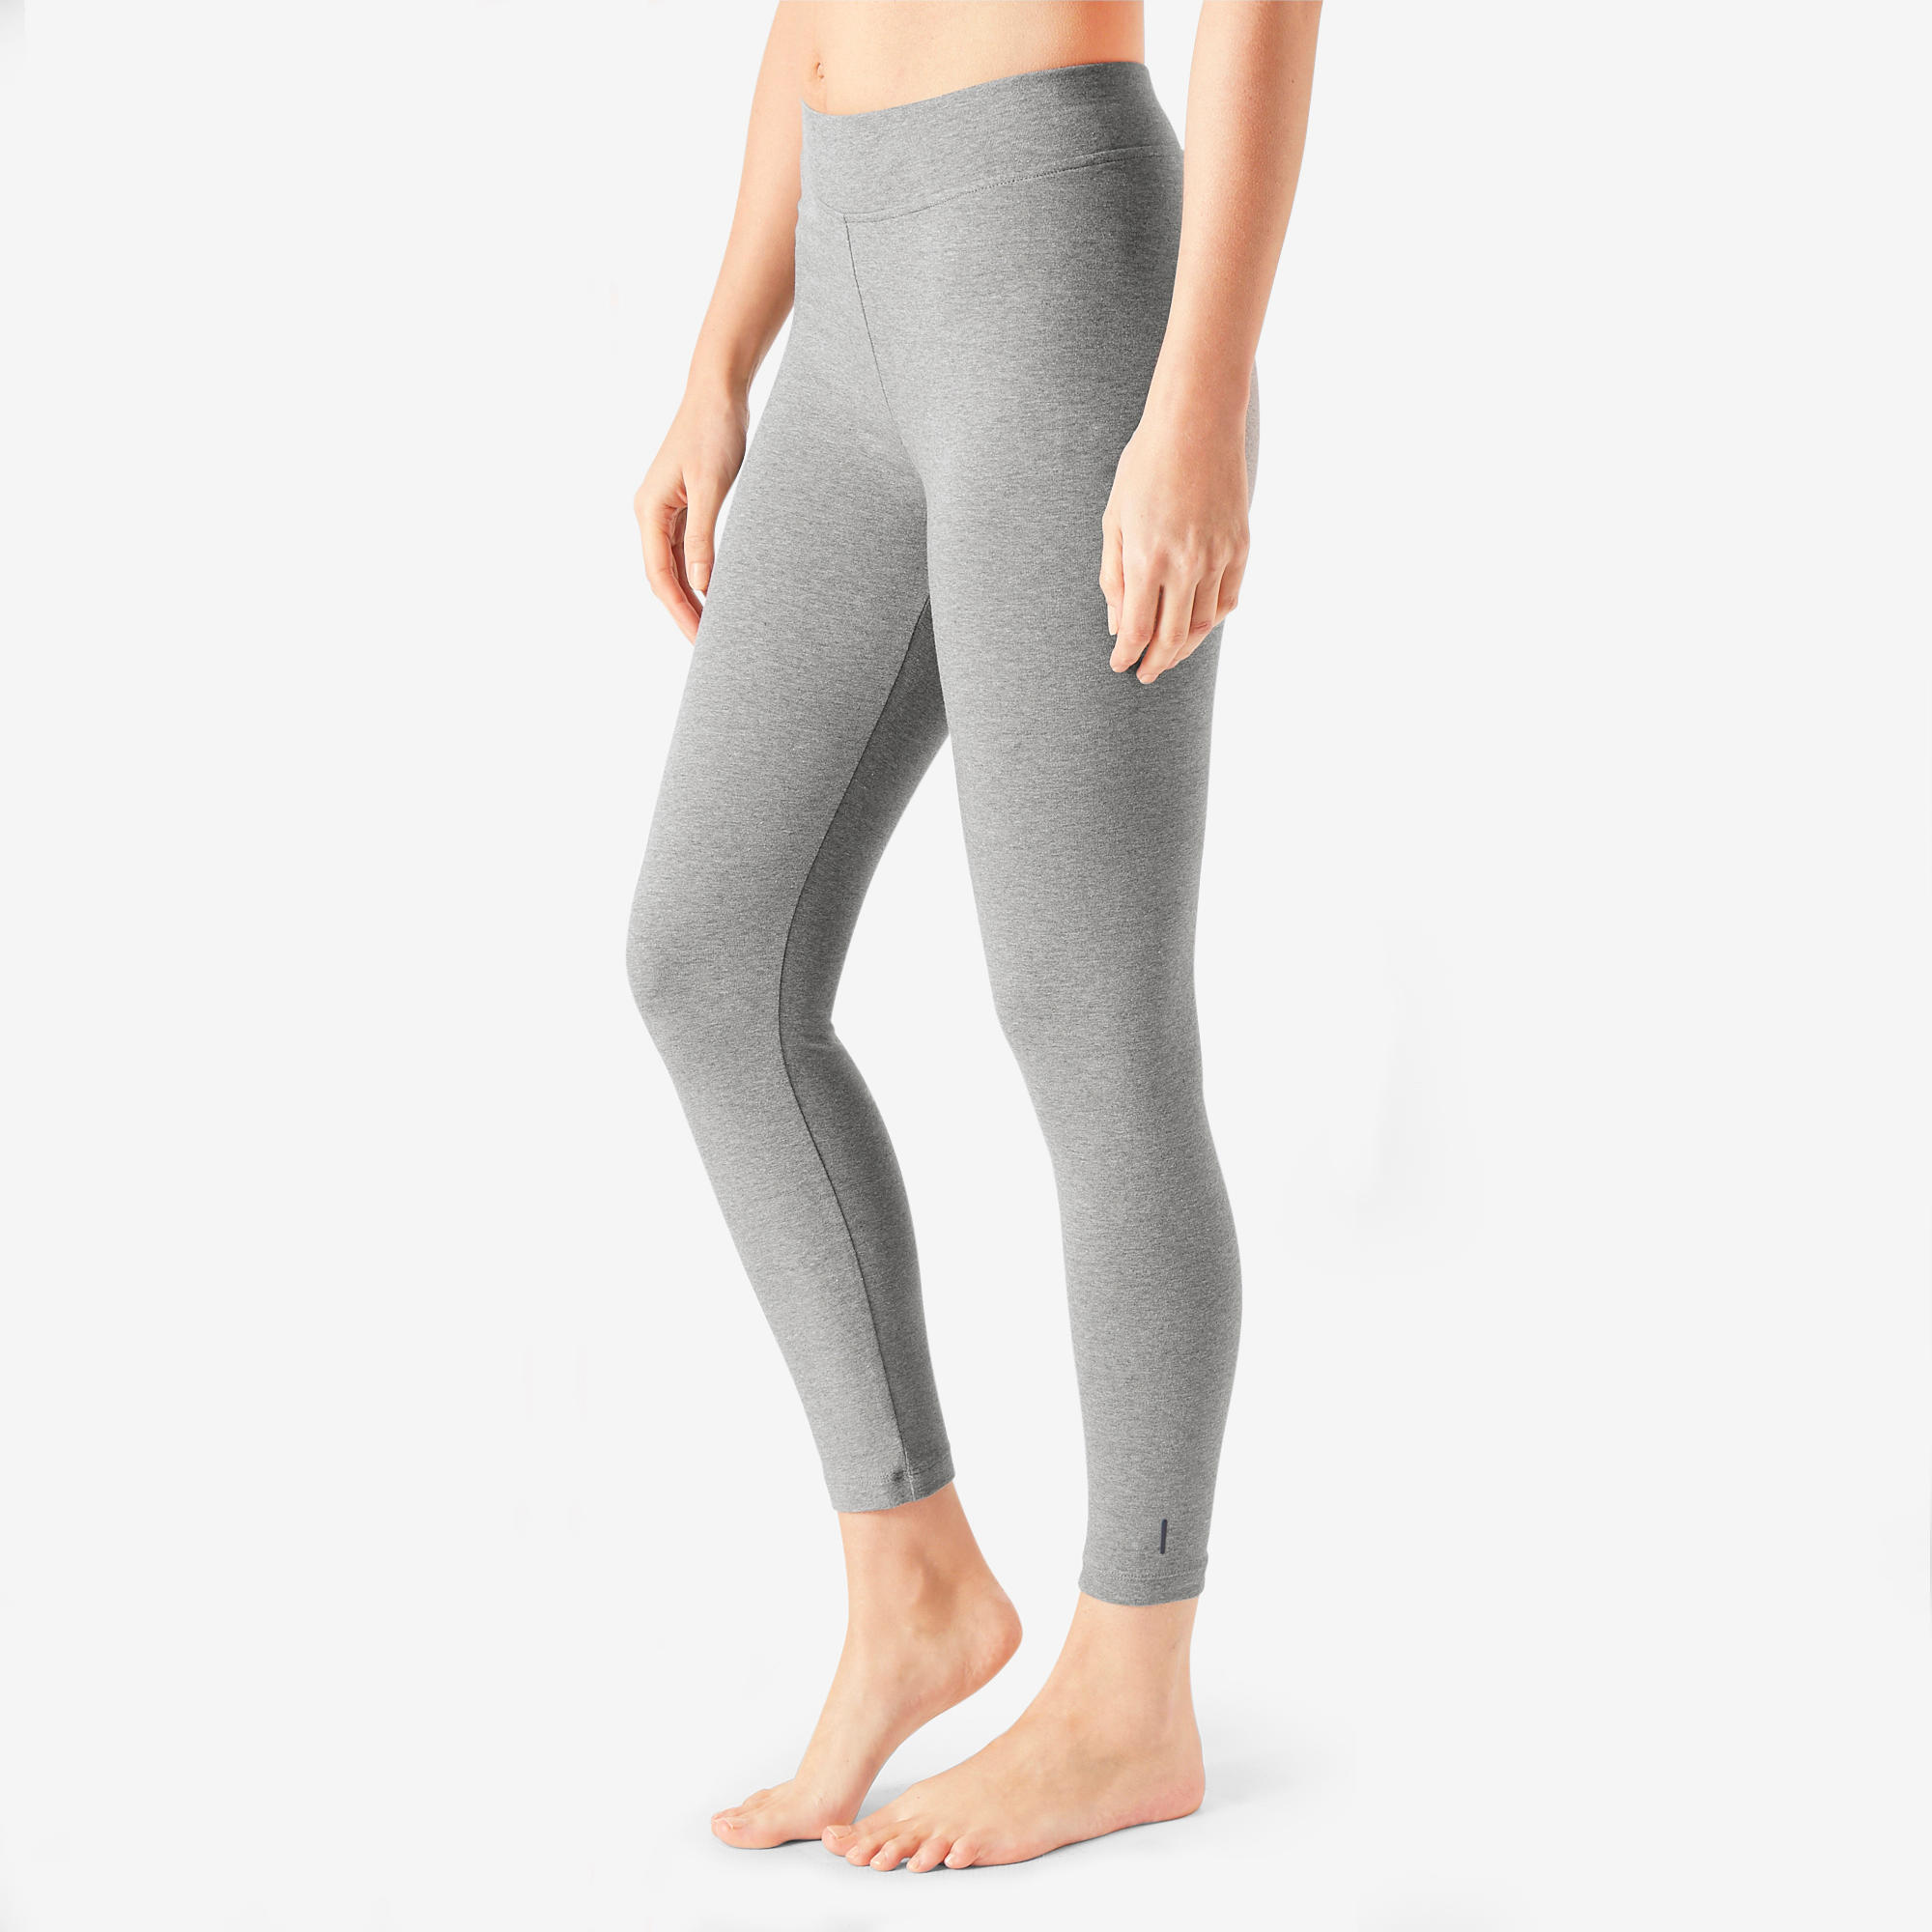 Lovable Cotton Gym Wear Grey Track Pants for ladies – Stilento